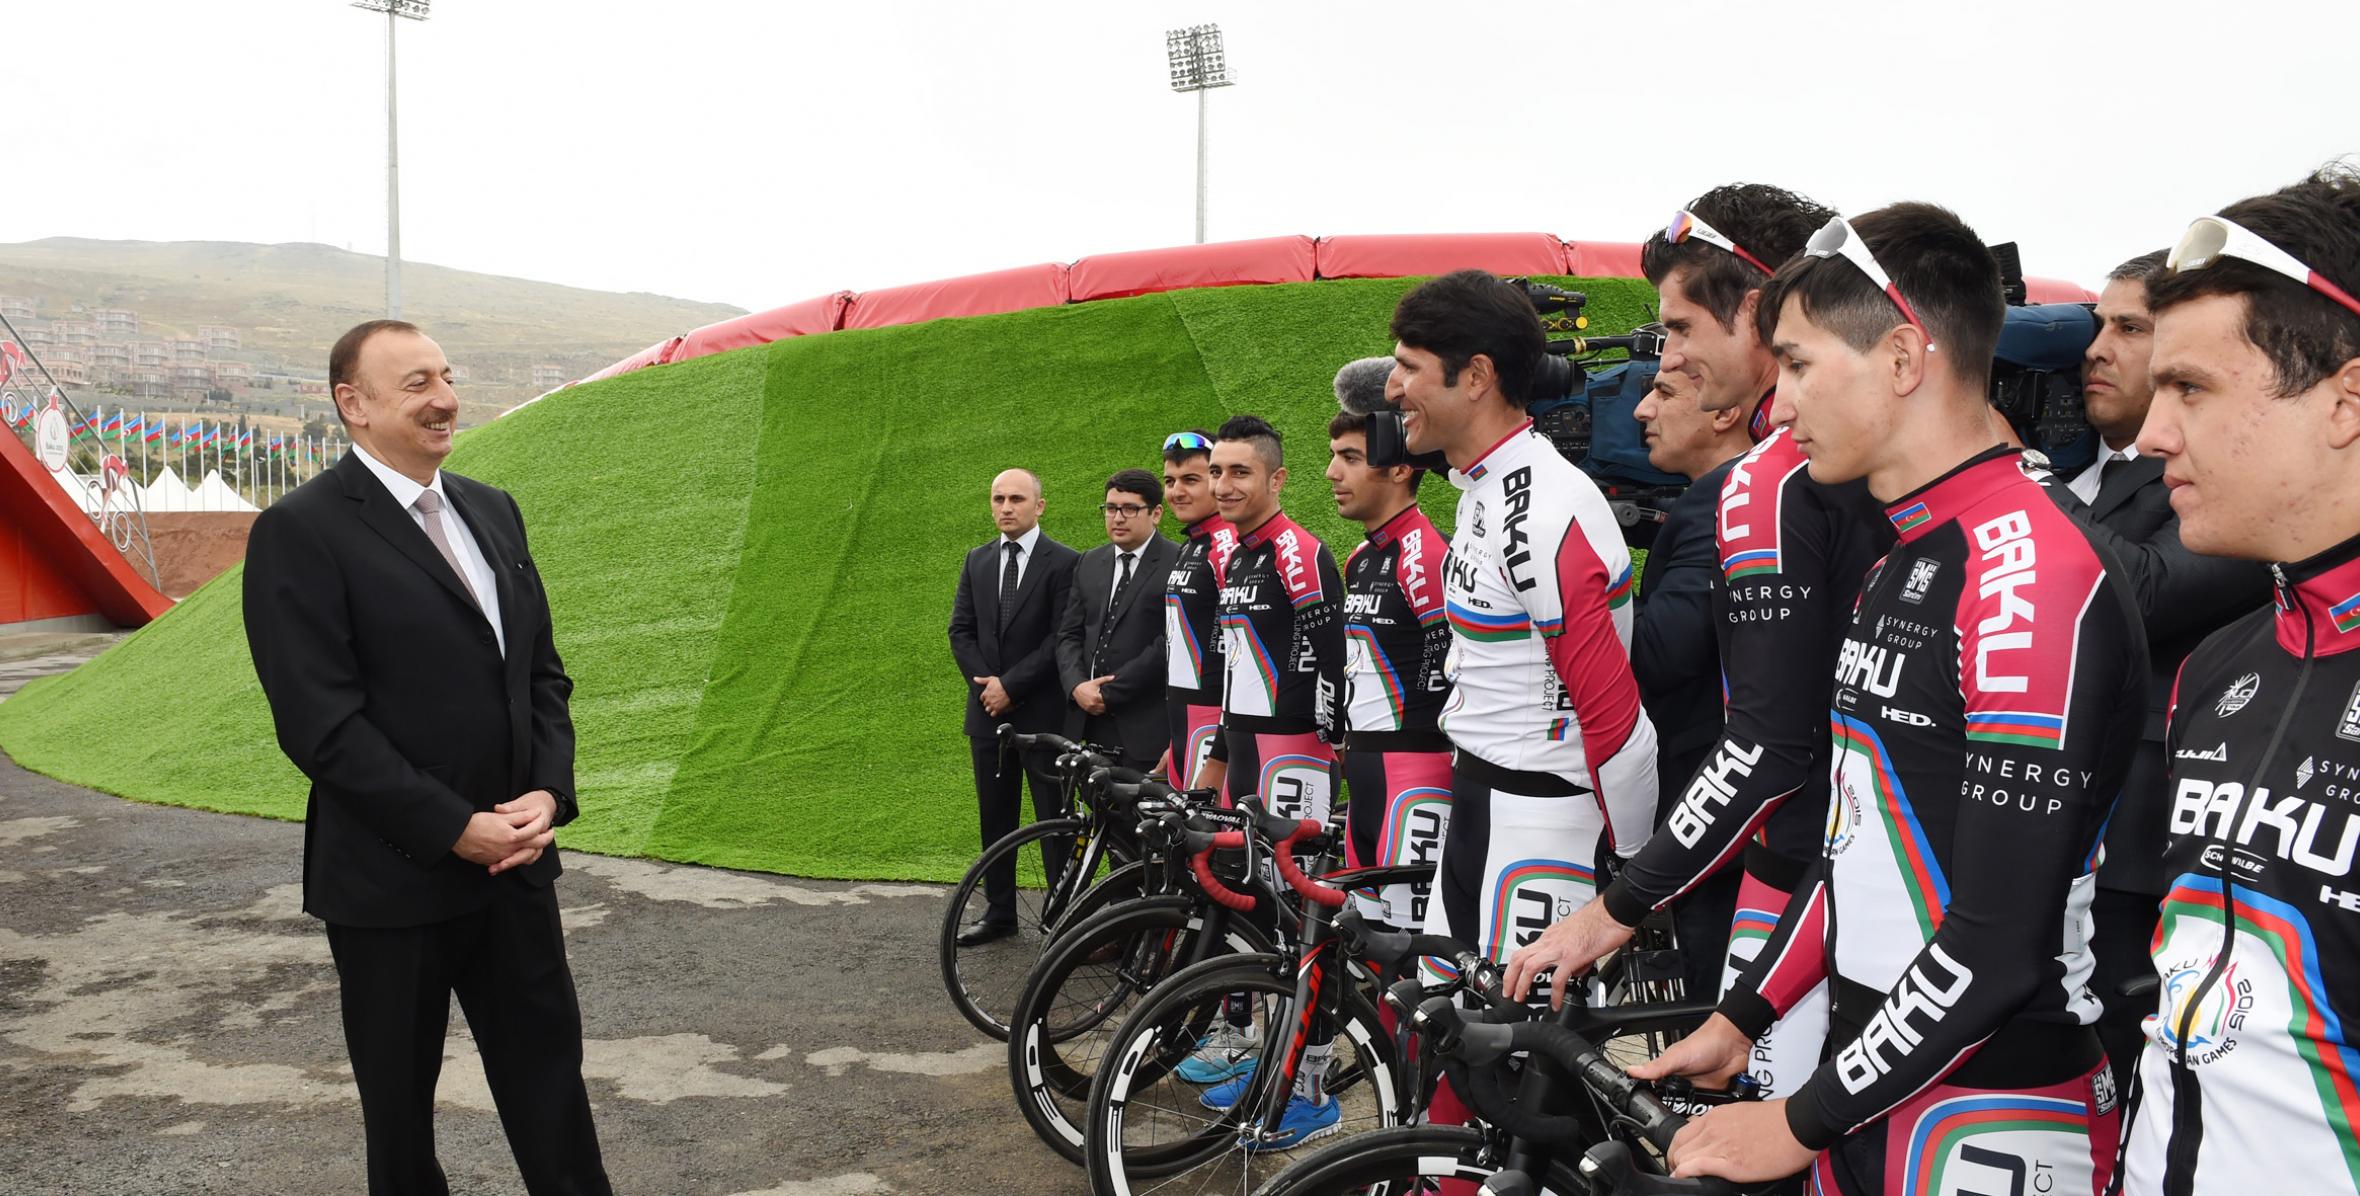 Ilham Aliyev attended the opening of the Bike Park